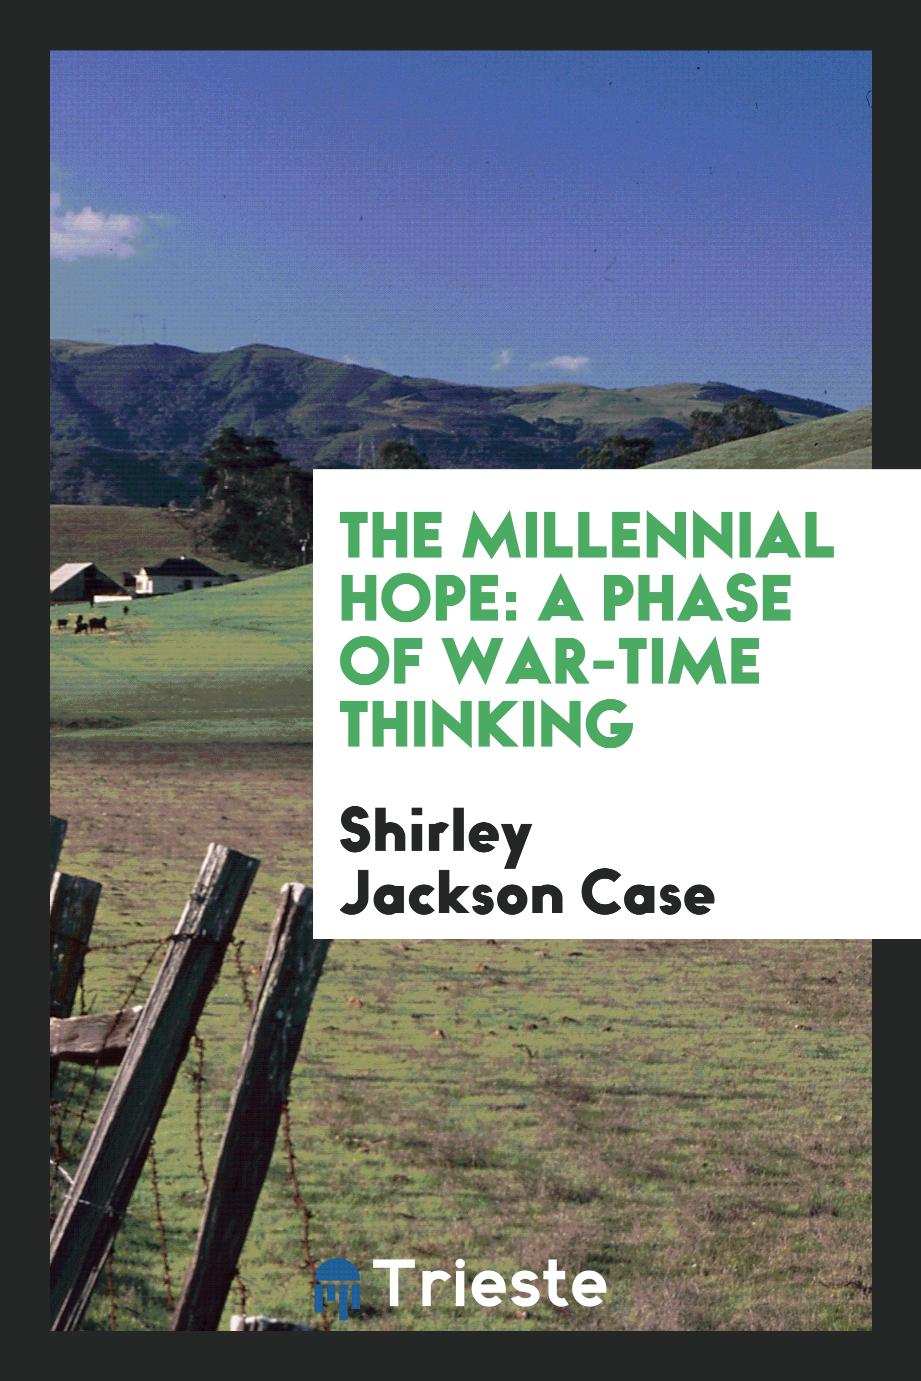 The millennial hope: a phase of war-time thinking